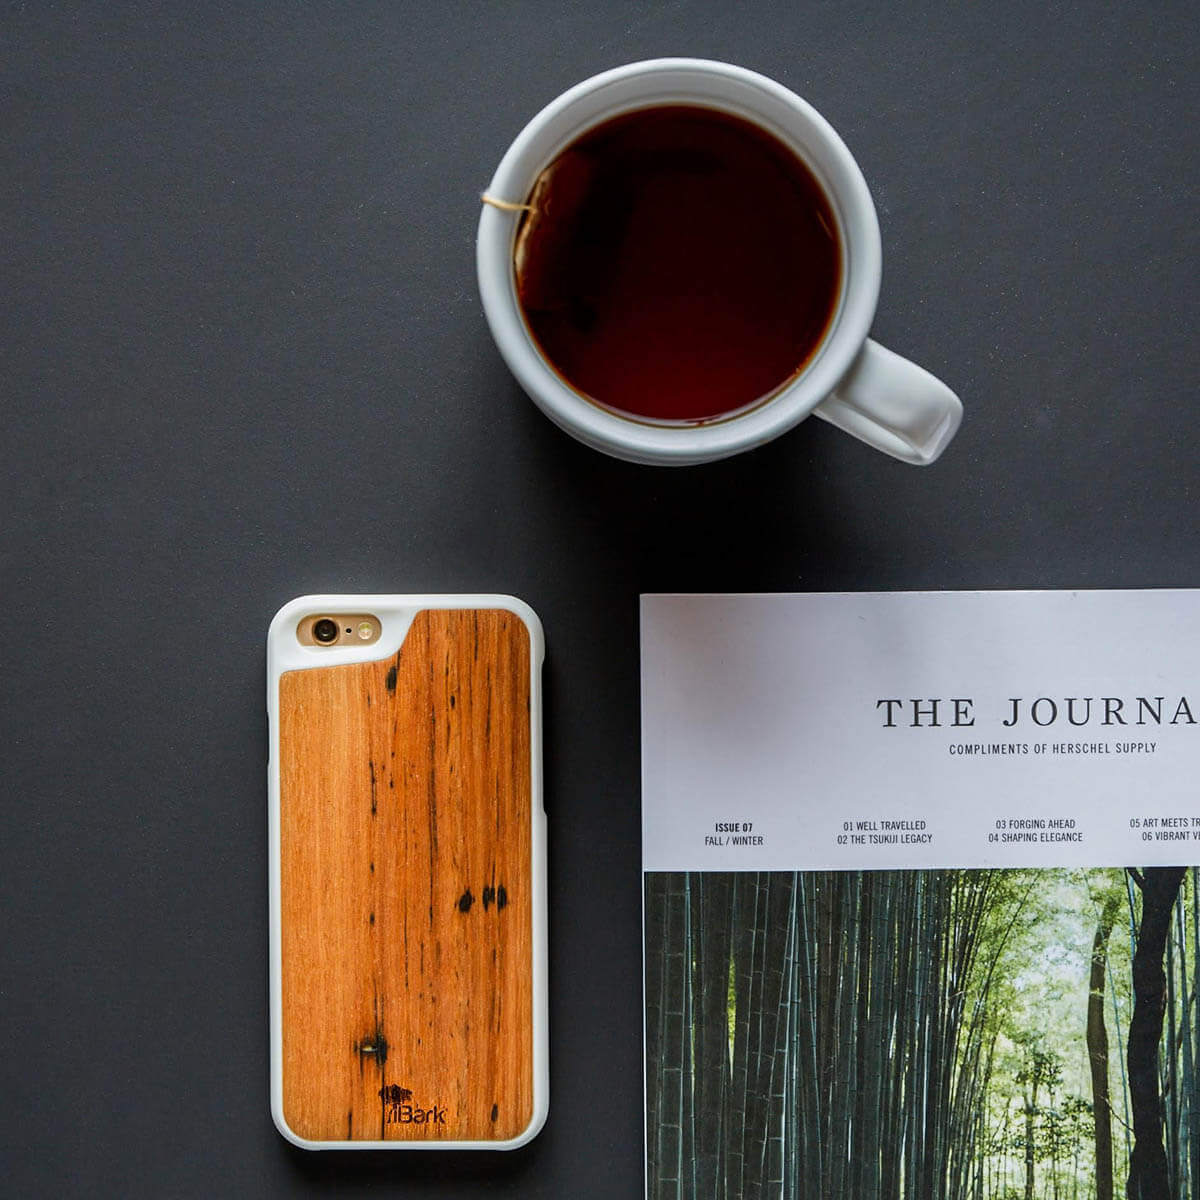 Cellphone with iBark wood cover on table with teacup and book